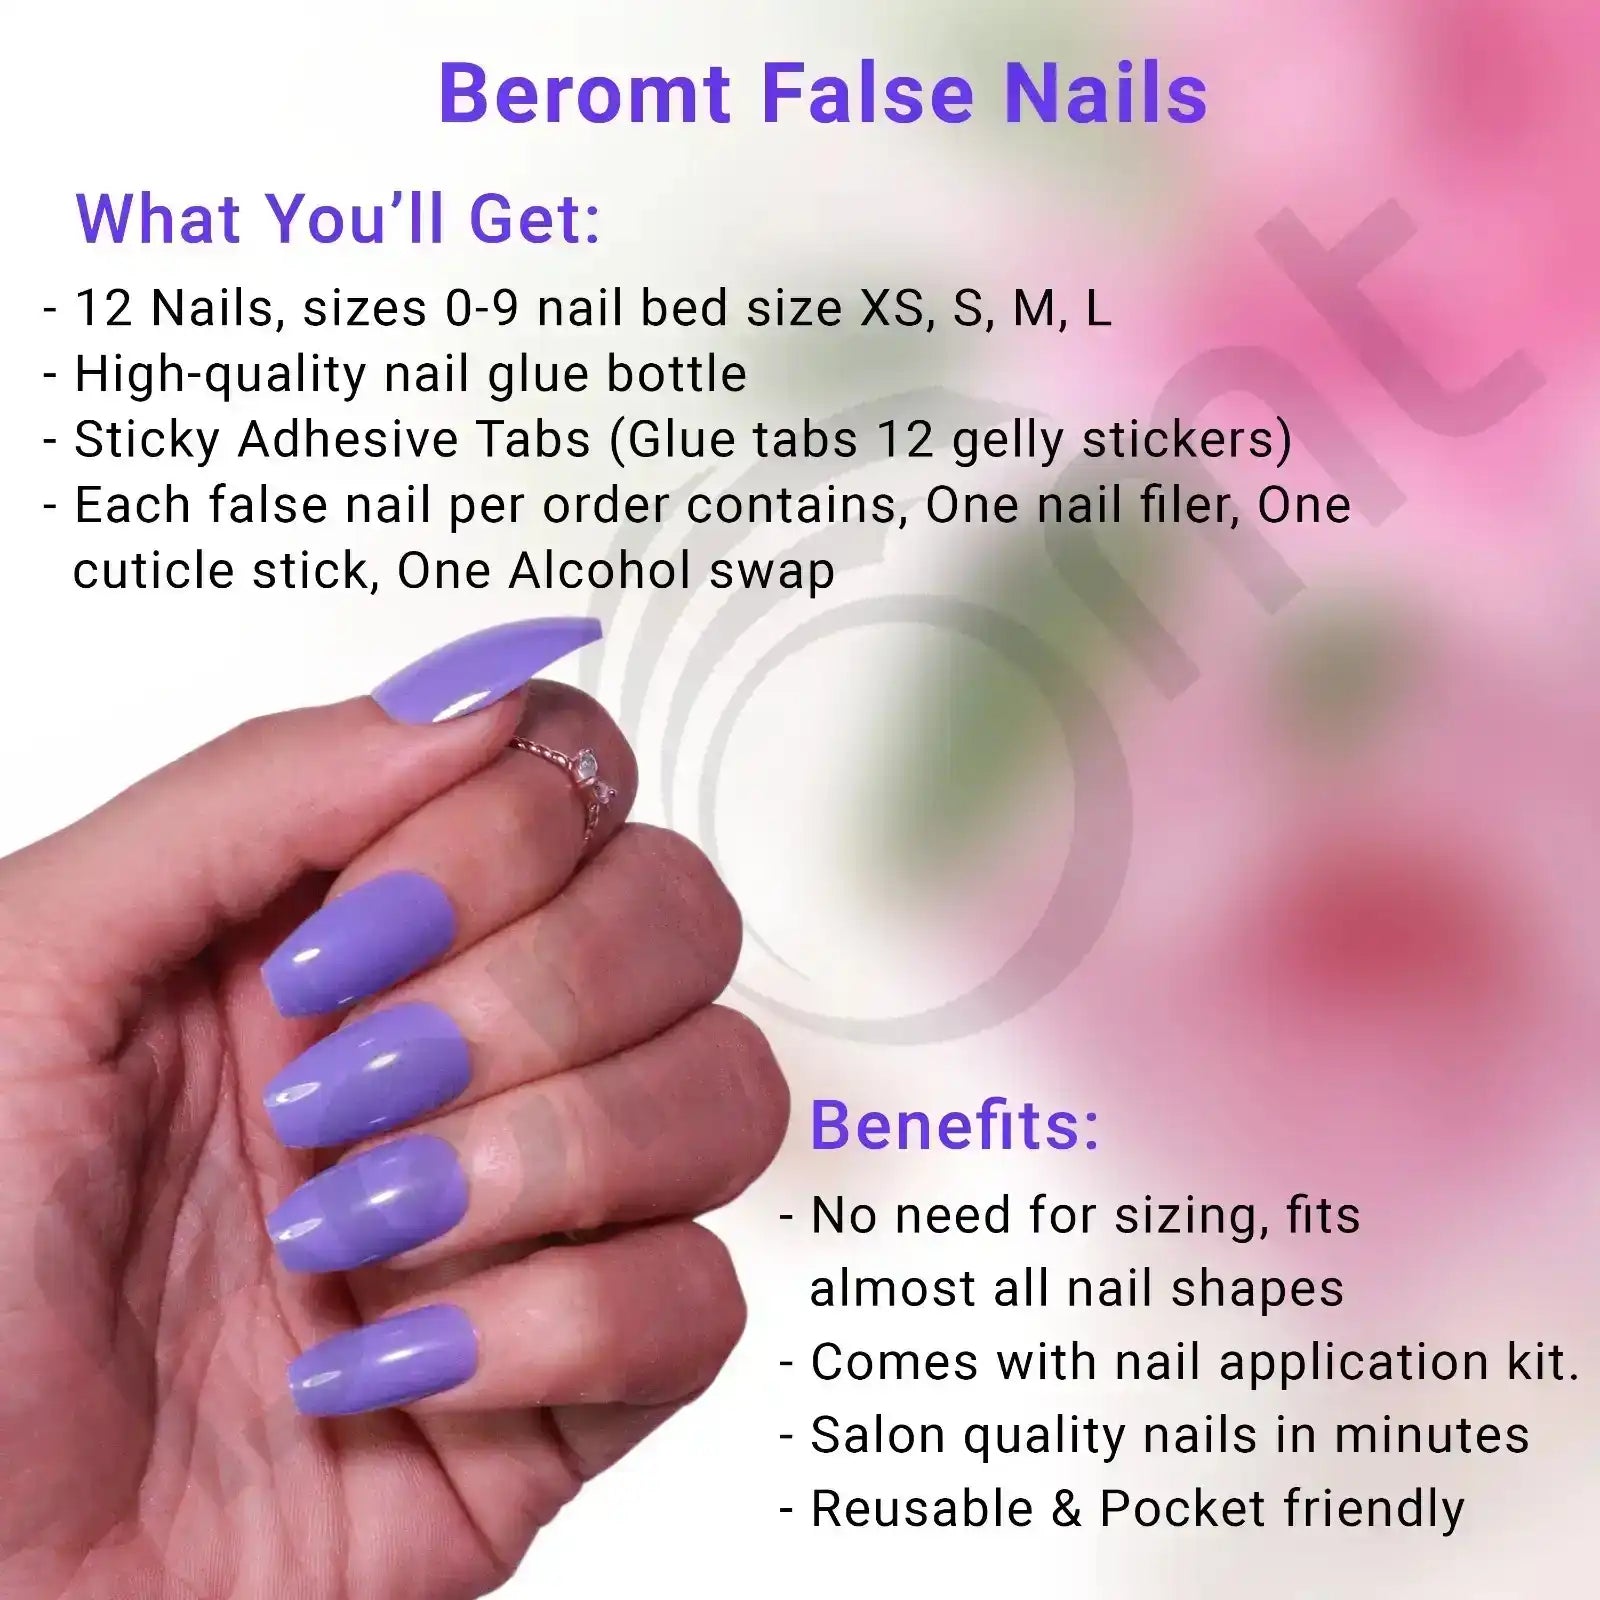 PARTY NAILS -BFNC 21 BFC (NAIL KIT INCLUDED)